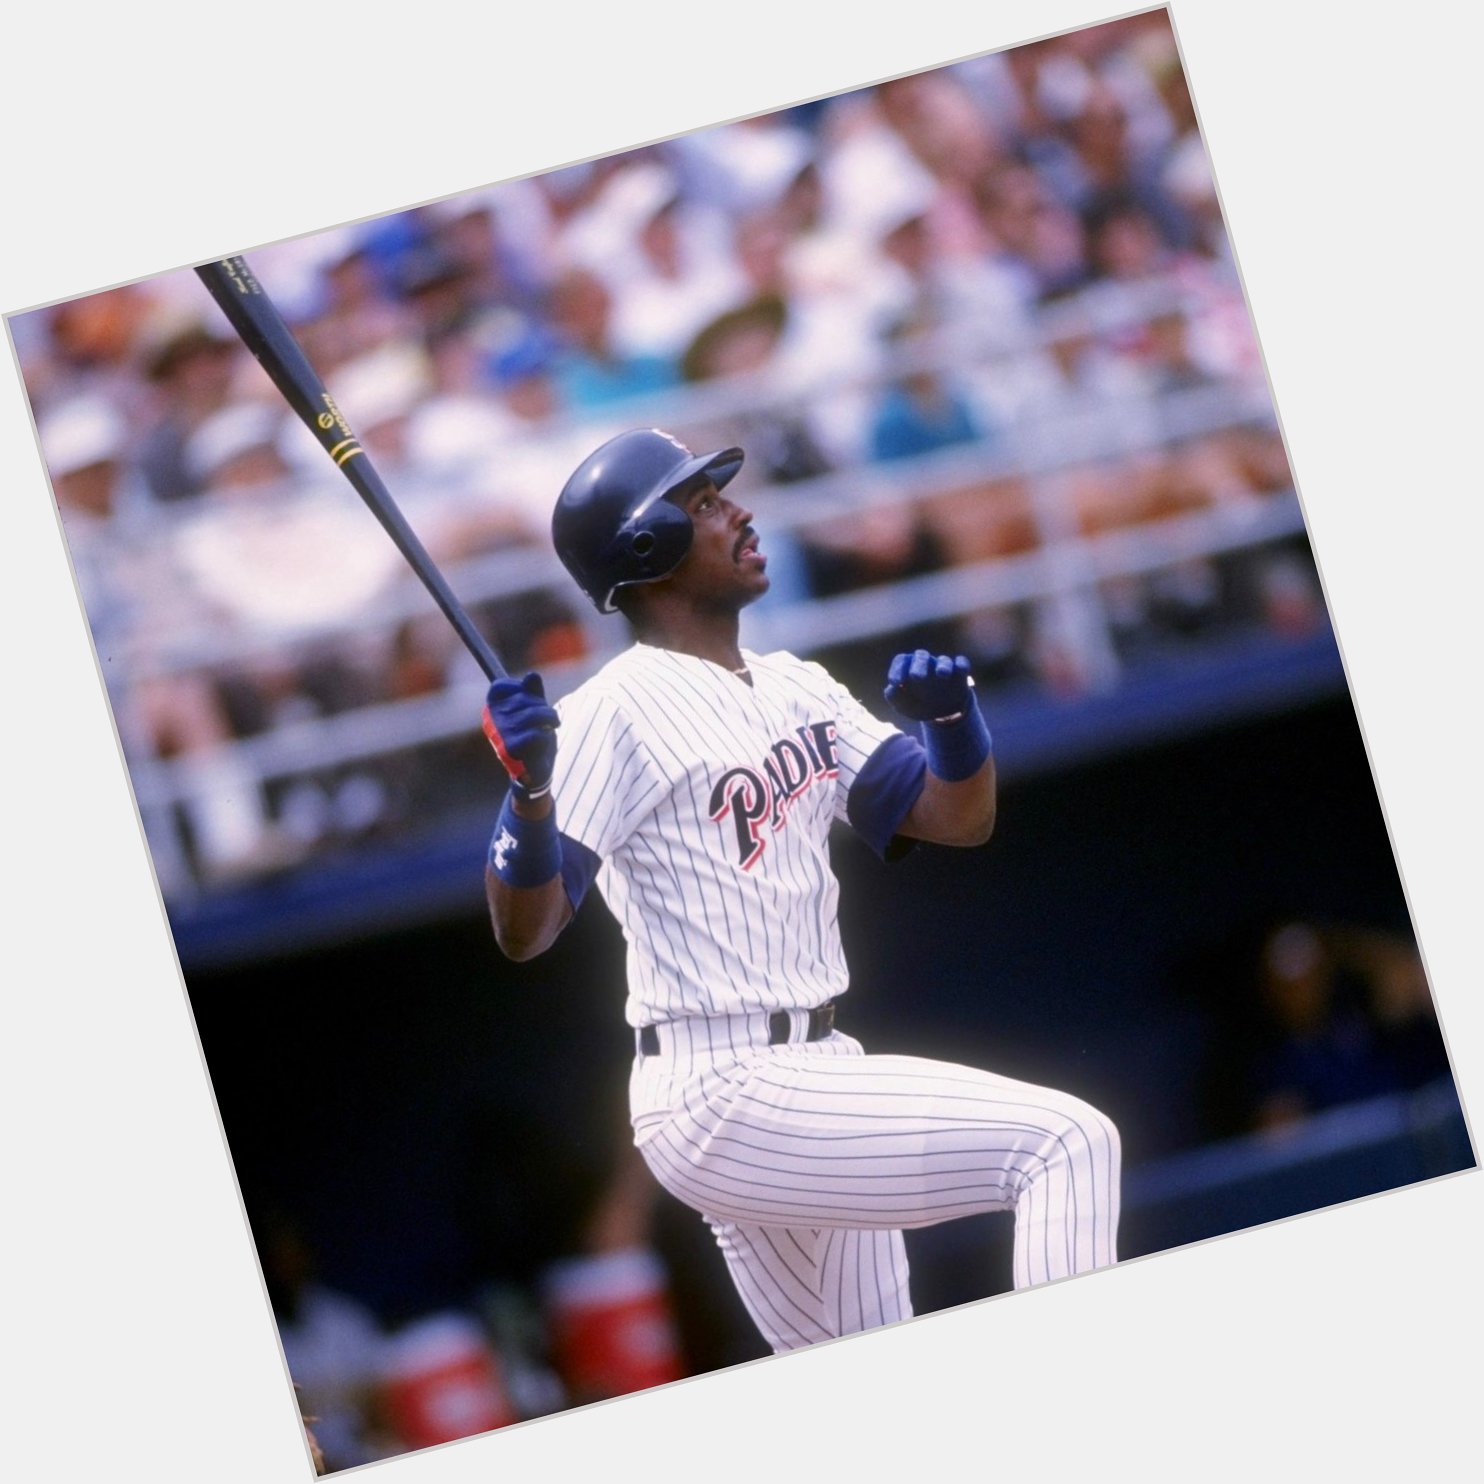 Wishing a happy birthday to 1992 home run leader and All-Star, Fred McGriff!   